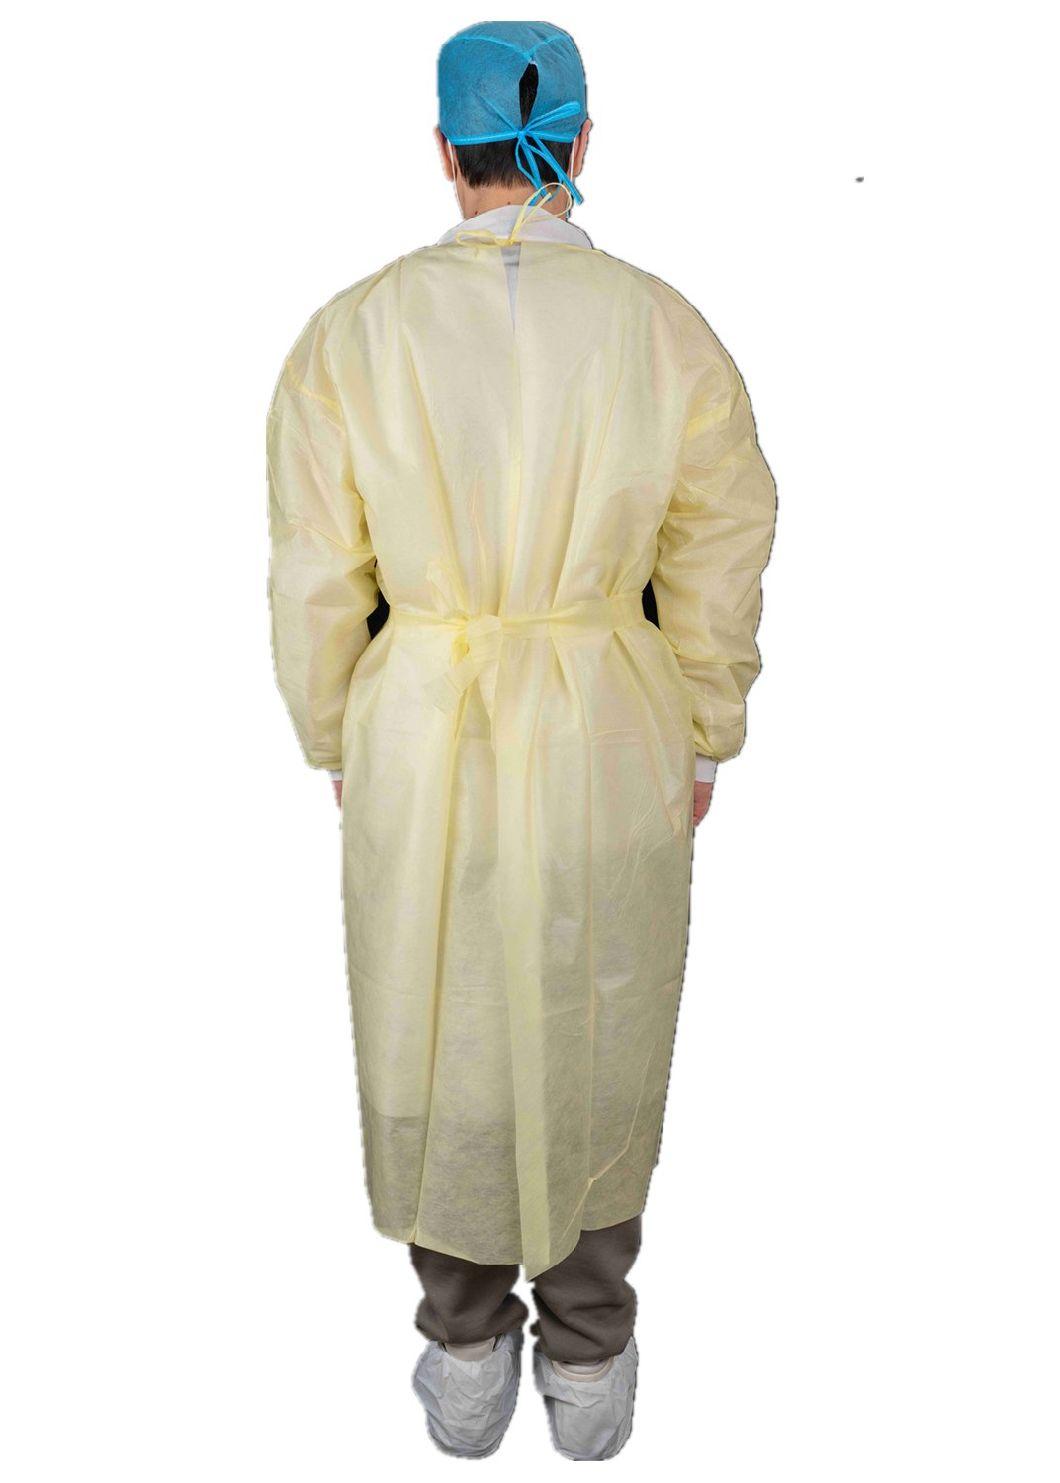 Disposable Good Protective Isolation Gown with Knitted Wrist by SMS Material for Prevent Bacterial and Splash